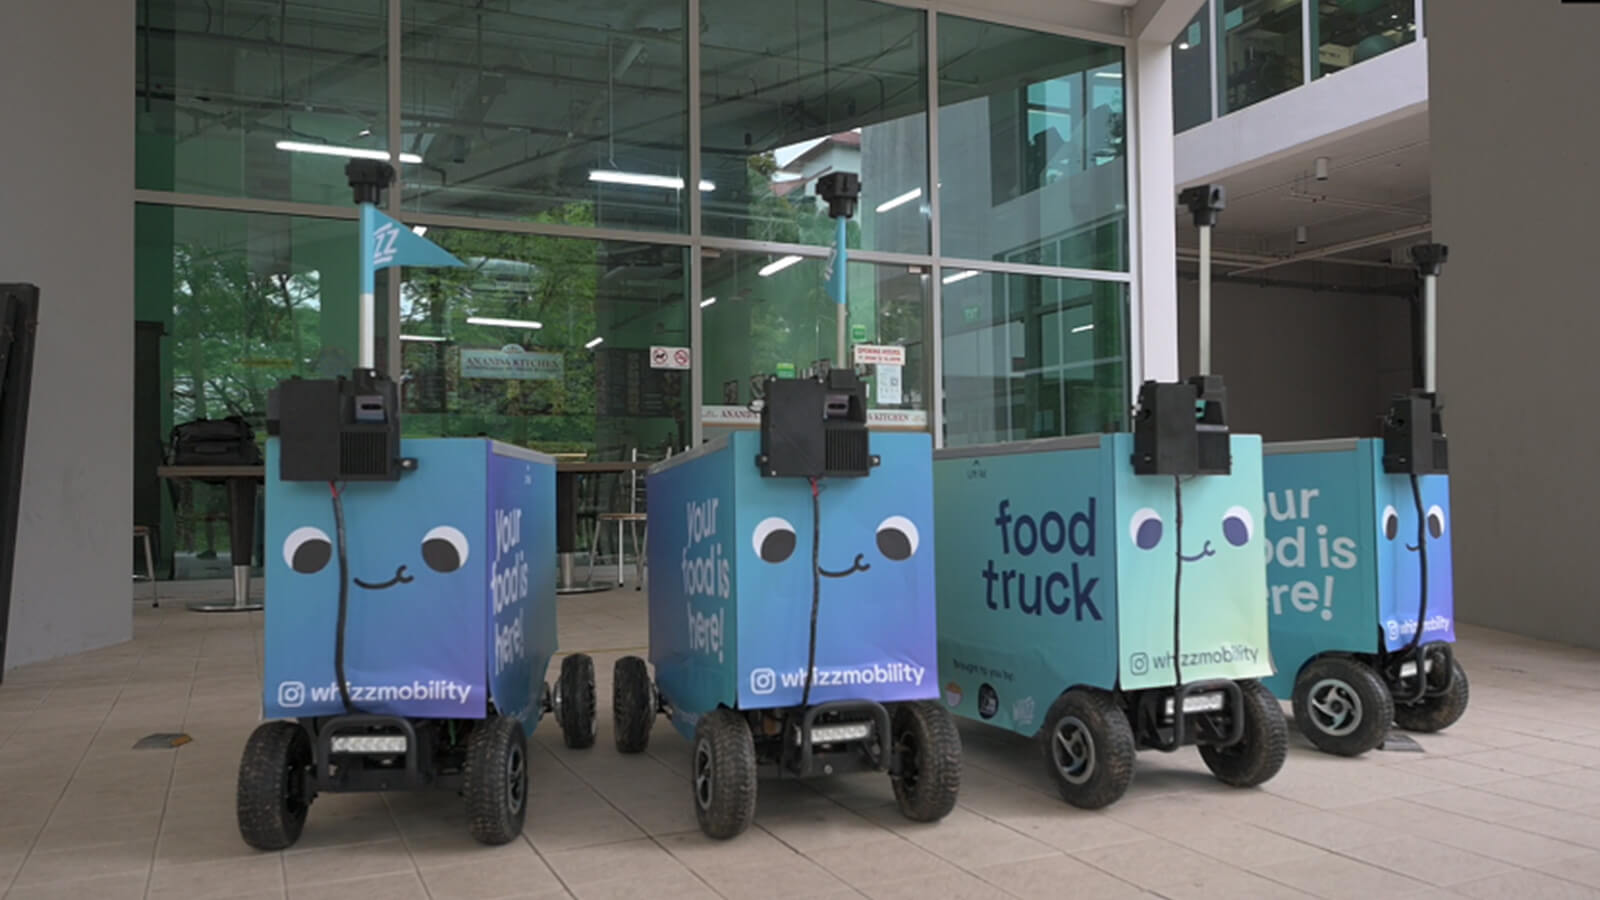 Whizz Mobility’s outdoor delivery robots, Foodbot